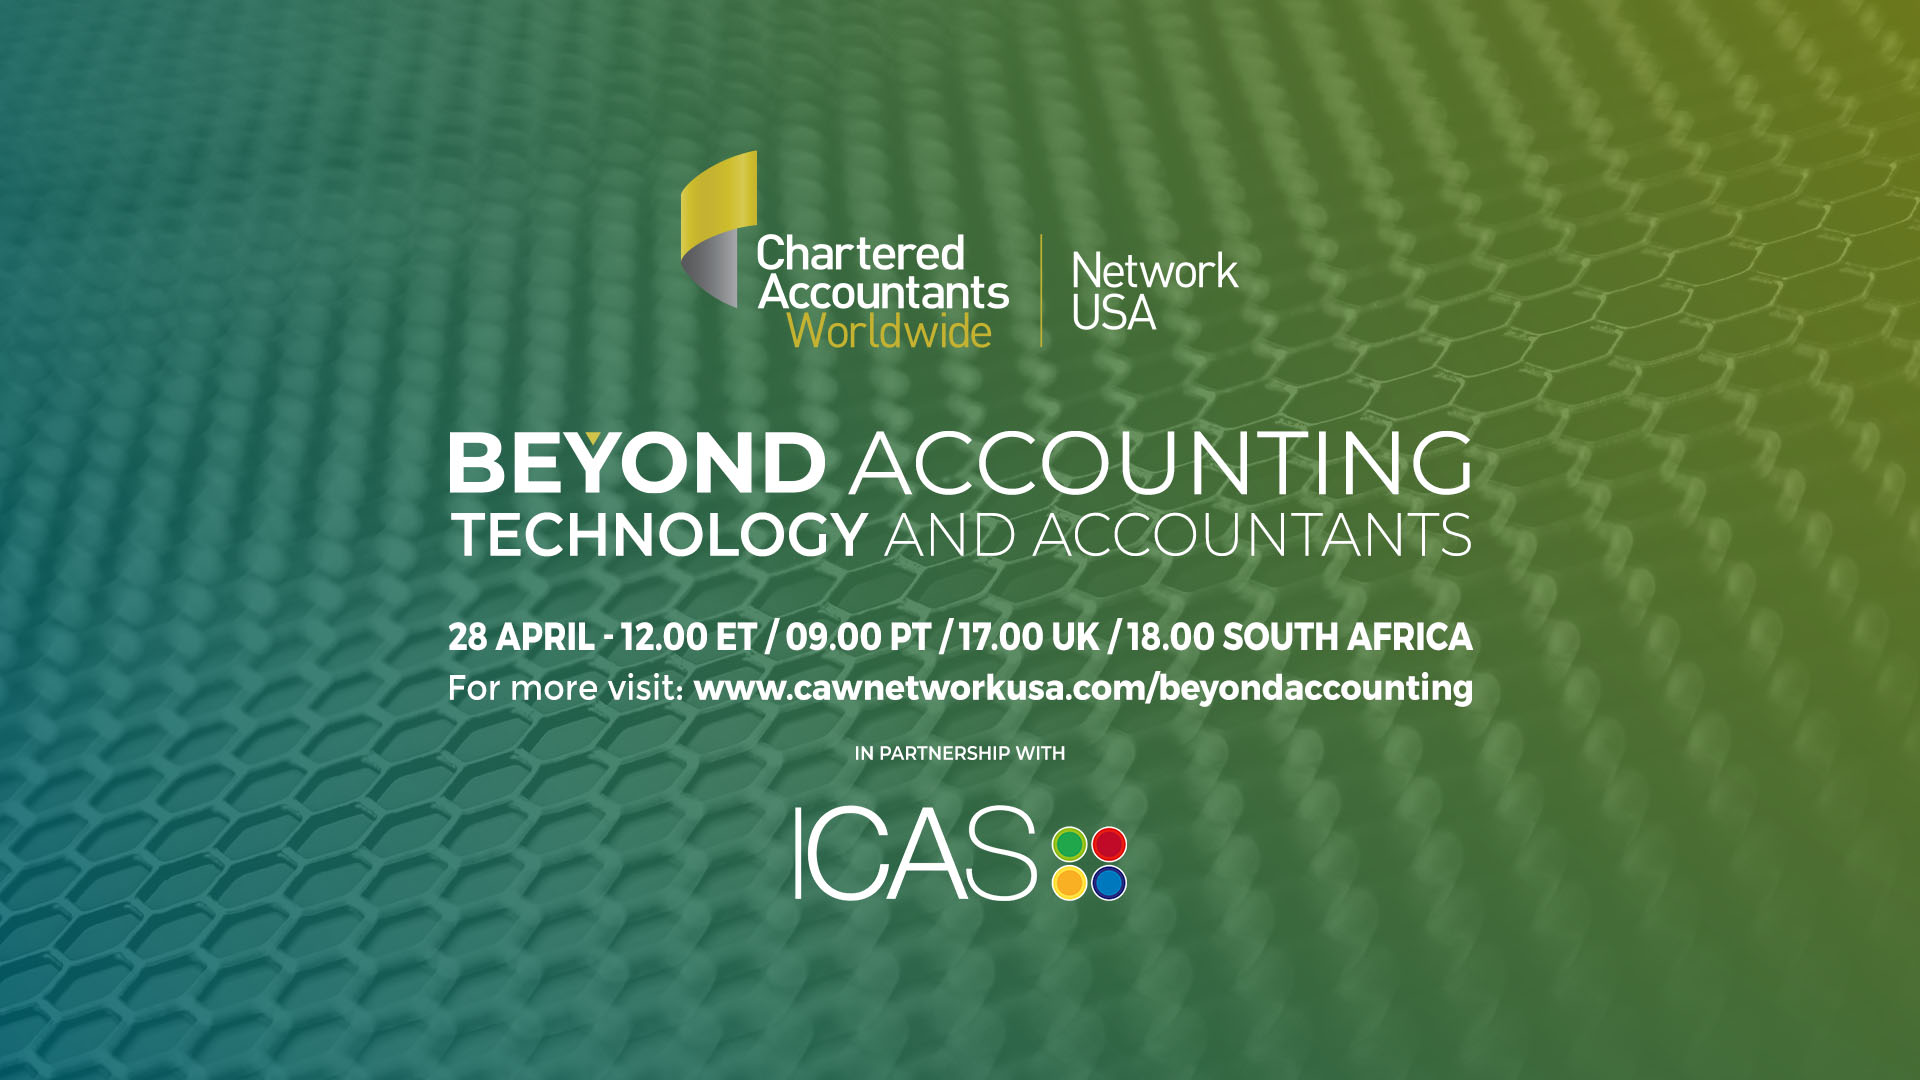 Beyond Accounting Technology and Accountants